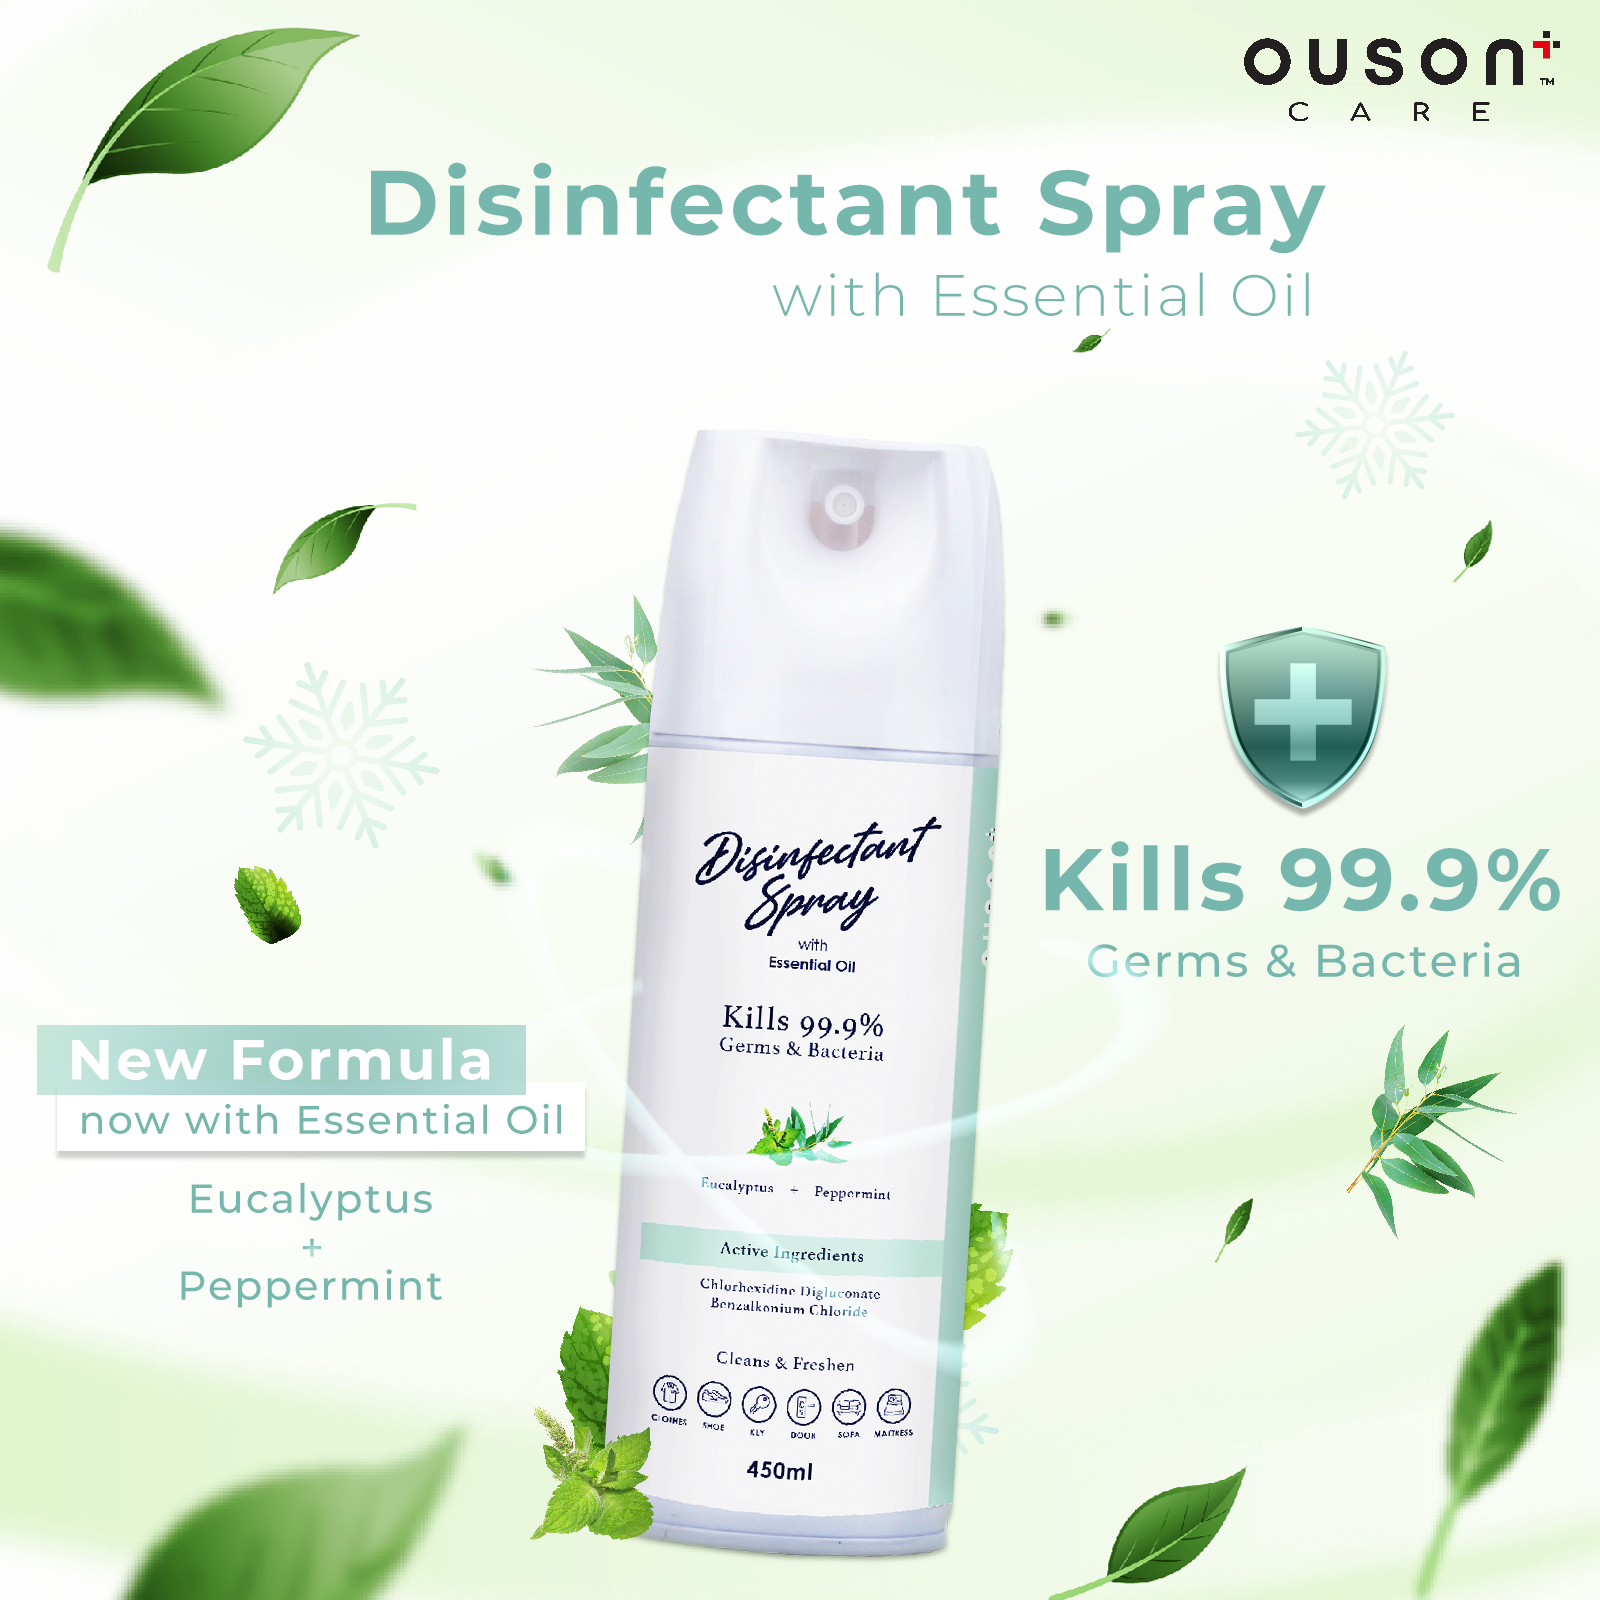 Ouson Care Disinfectant Spray with Essential Oil 450ml with Hand Sanitizer (Bundle)